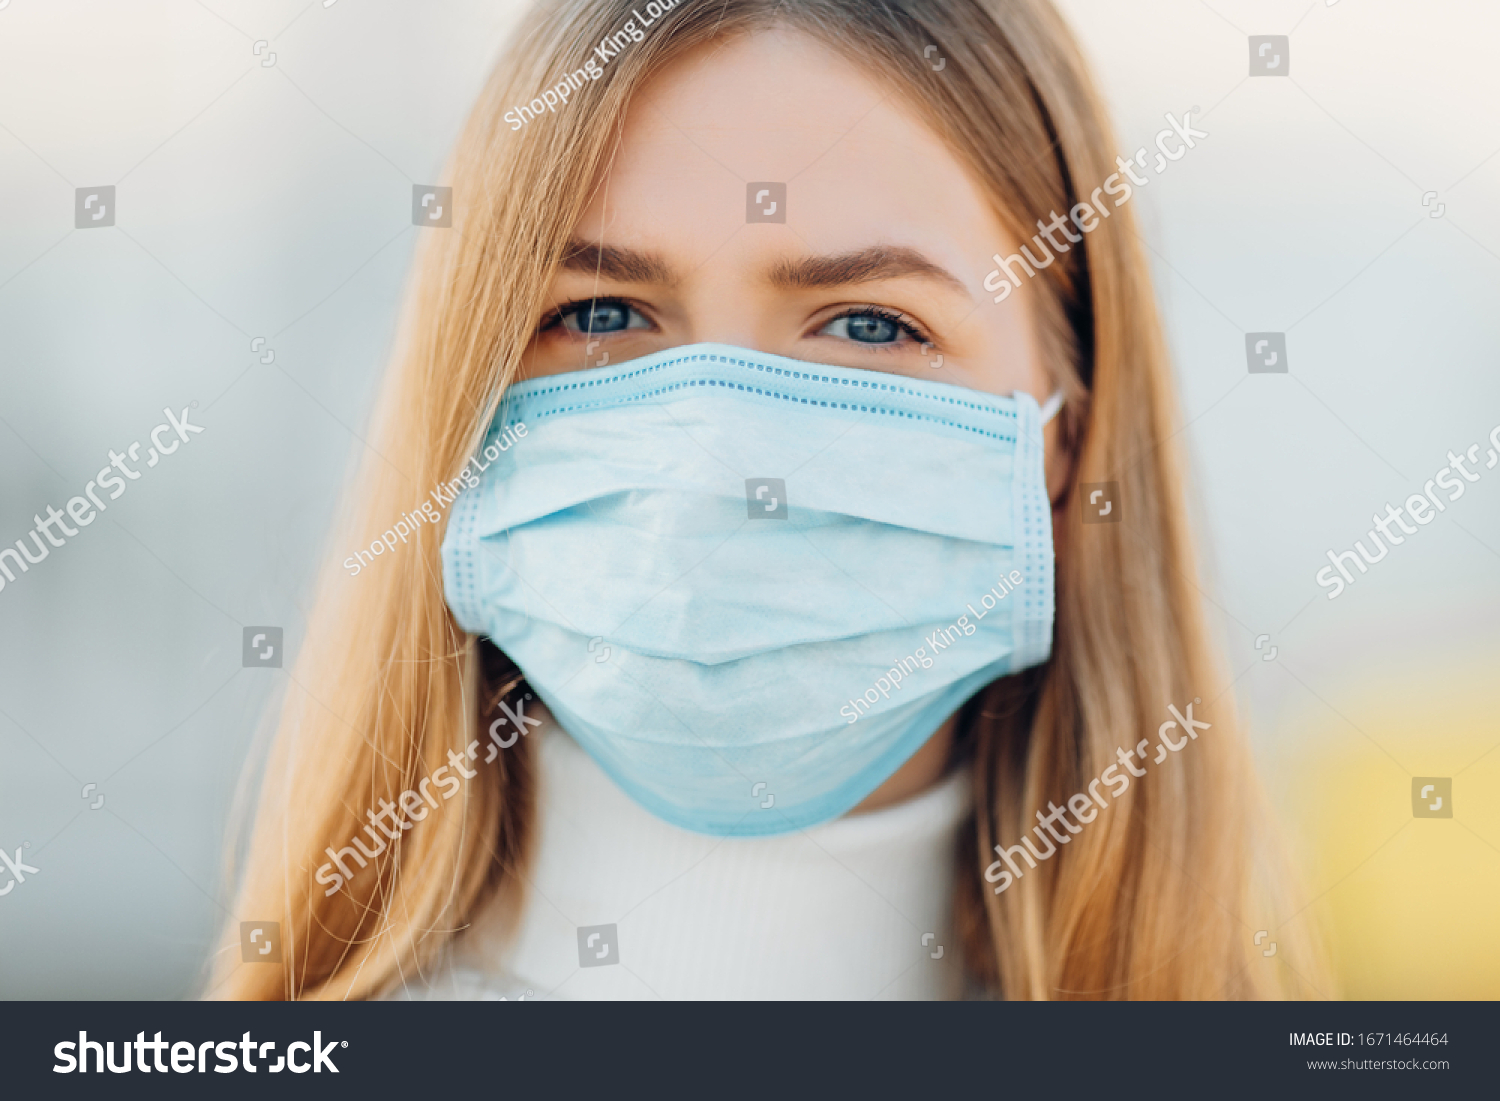 A young girl in the background of a building wears a face mask that protects against the spread of coronavirus disease. Close- up of a young woman with a surgical mask on her face against SARS-cov-2. #1671464464